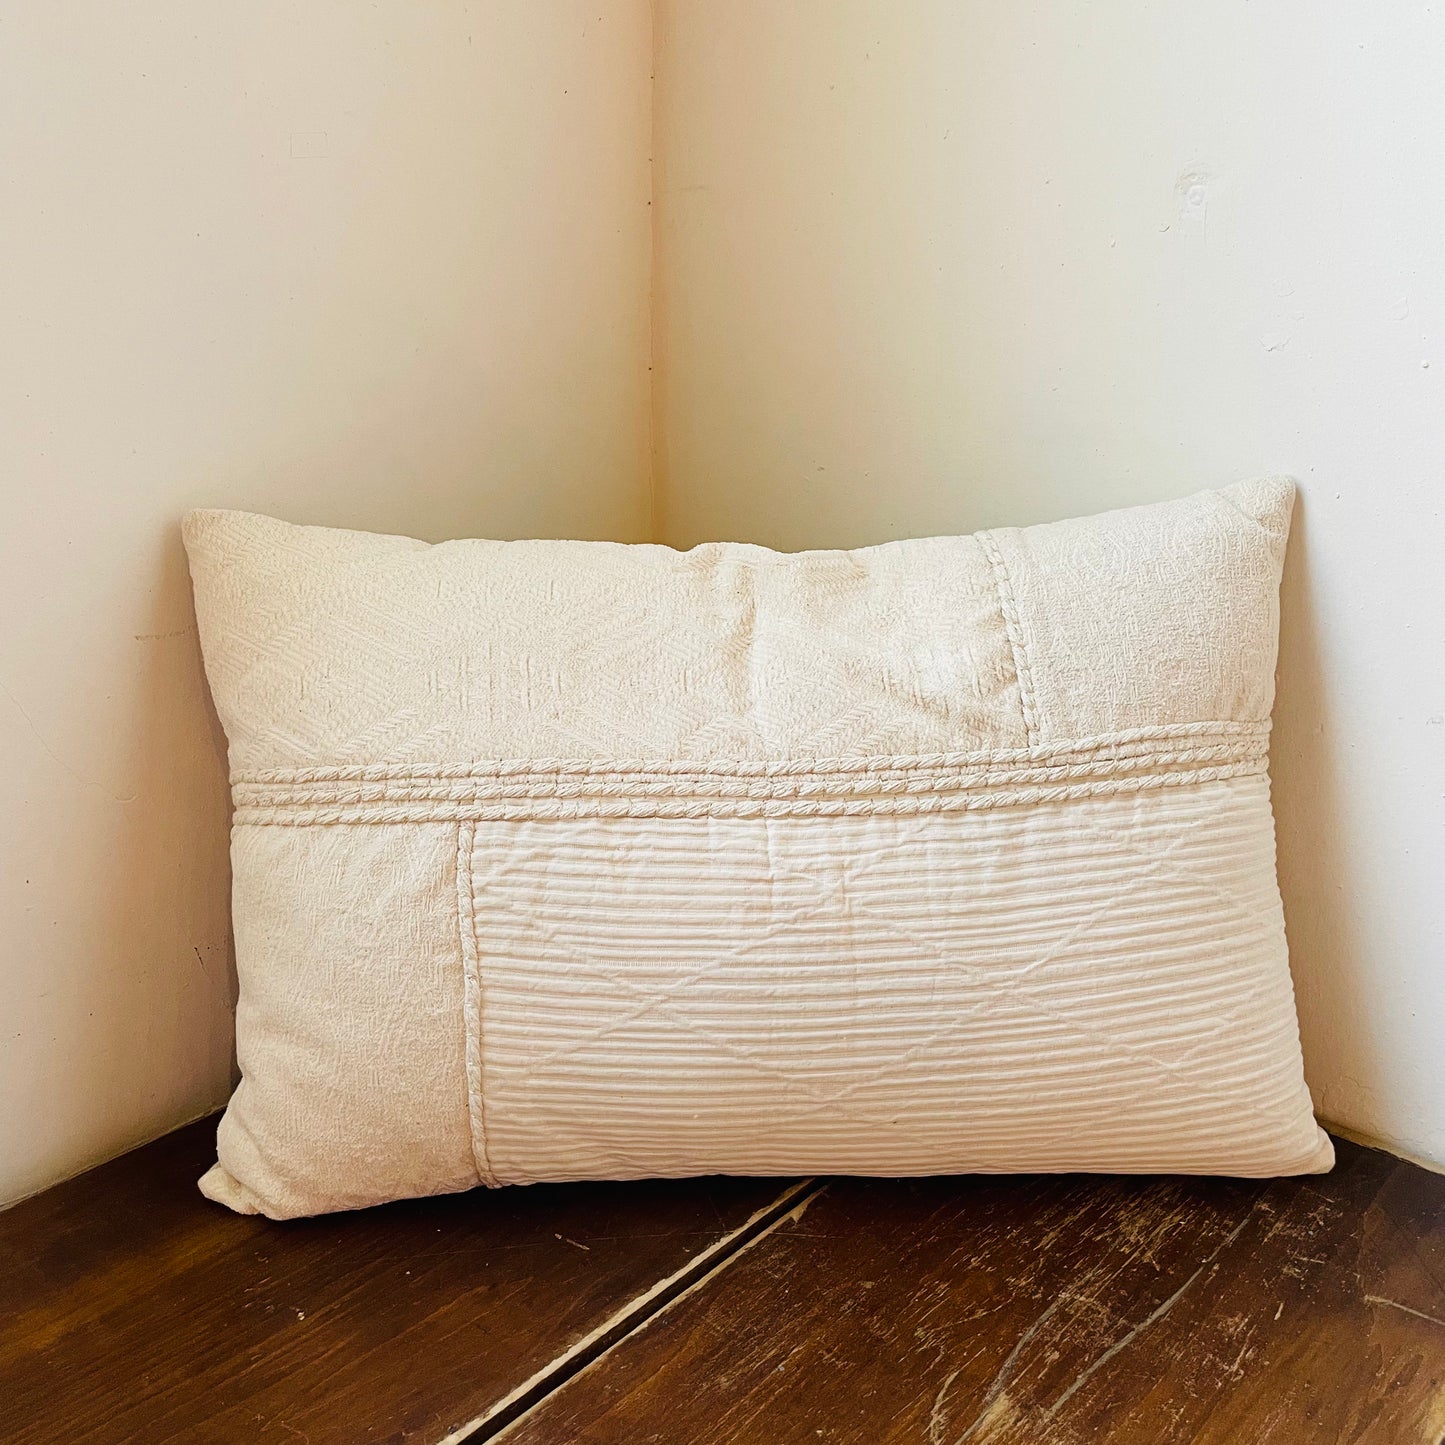 Rope Embroidery & Chambray Backed Pillow